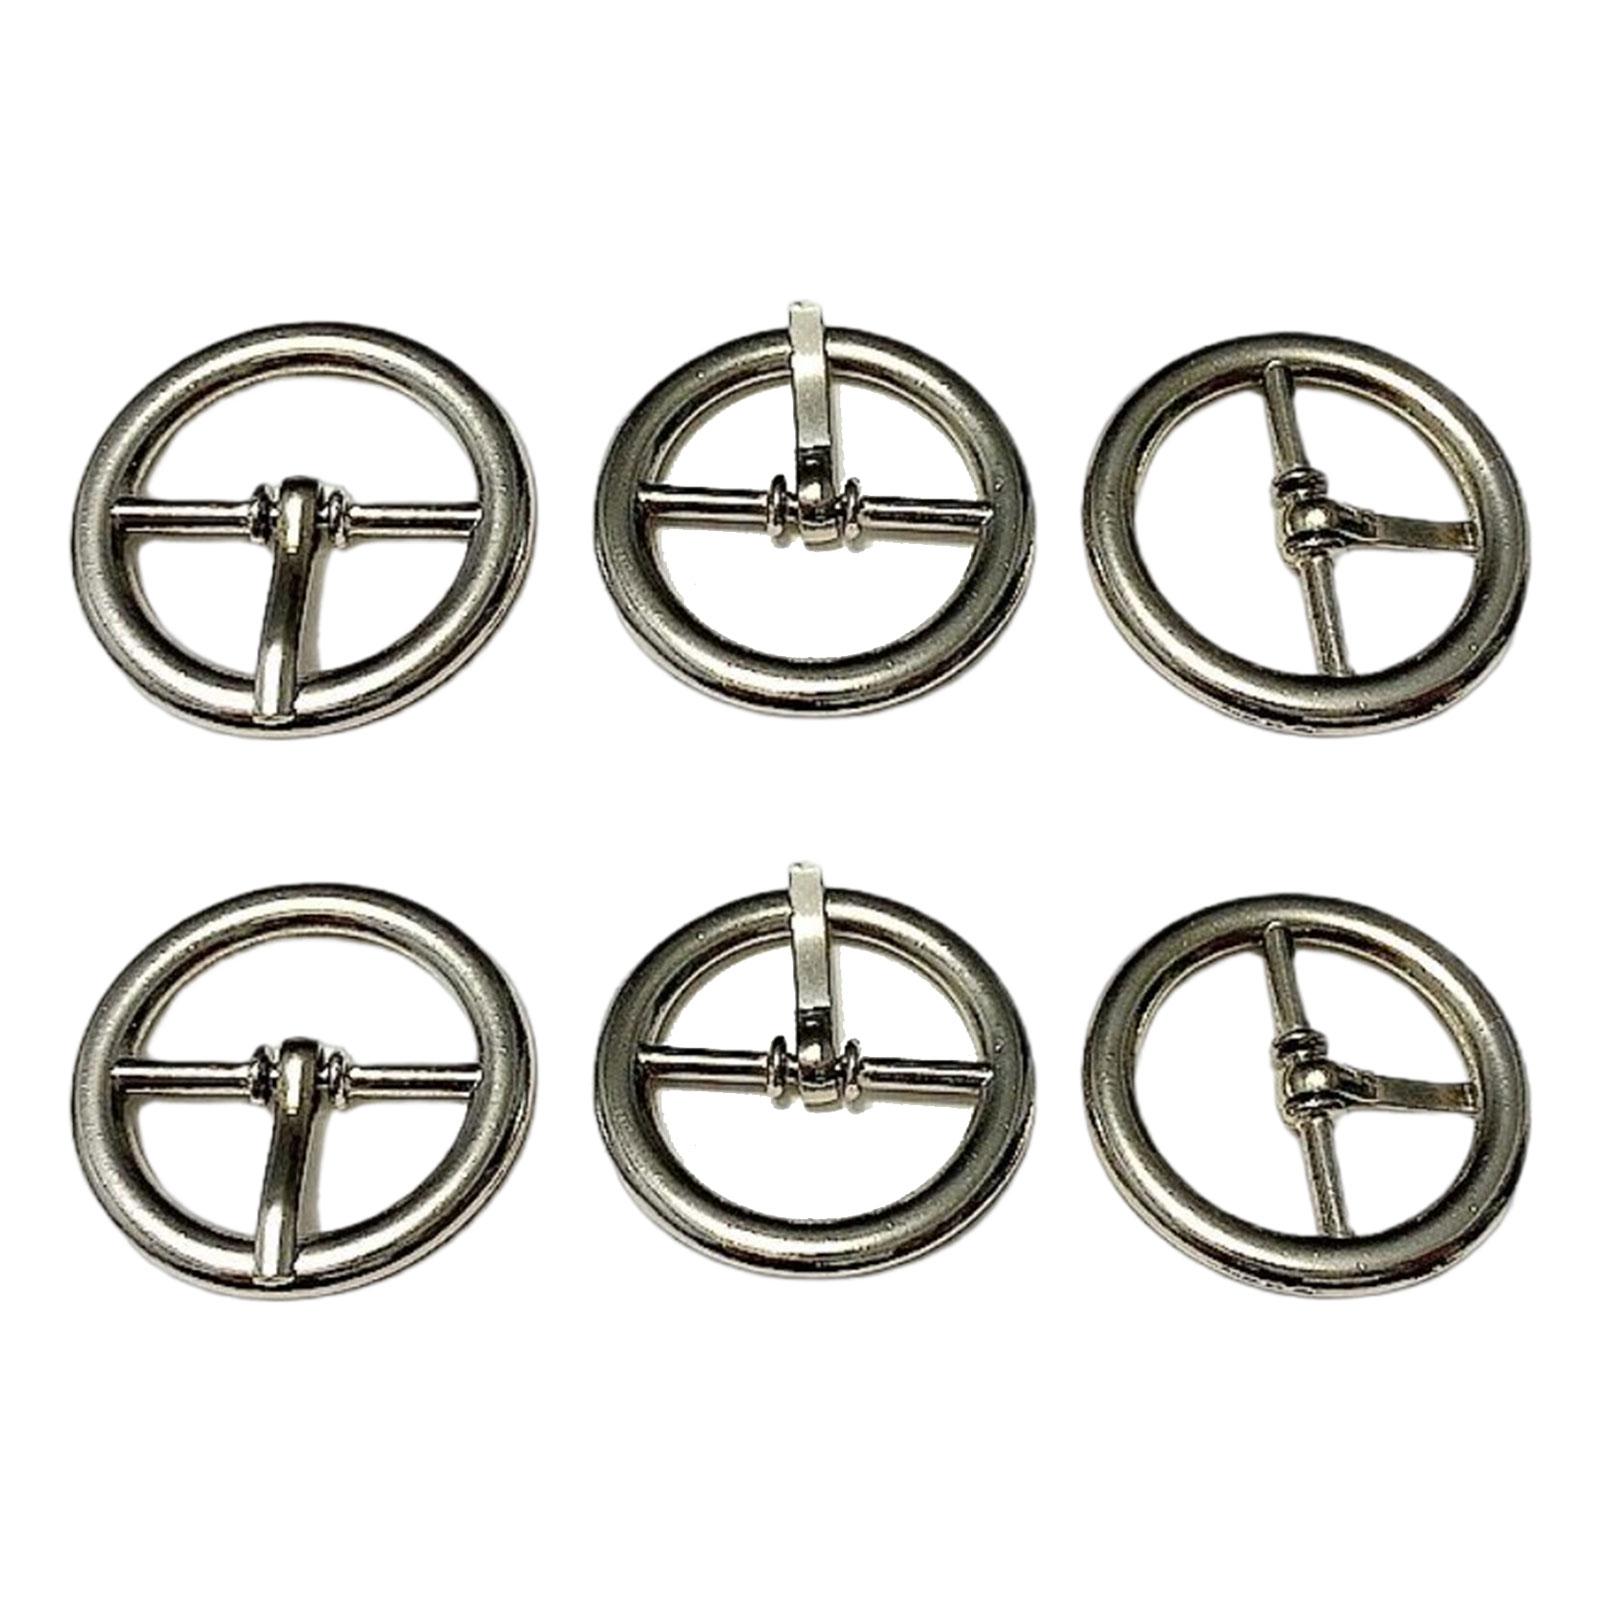 6x Belt Buckle Metal Argent Accs Easy to Use Ring Durable for DIY Unisex